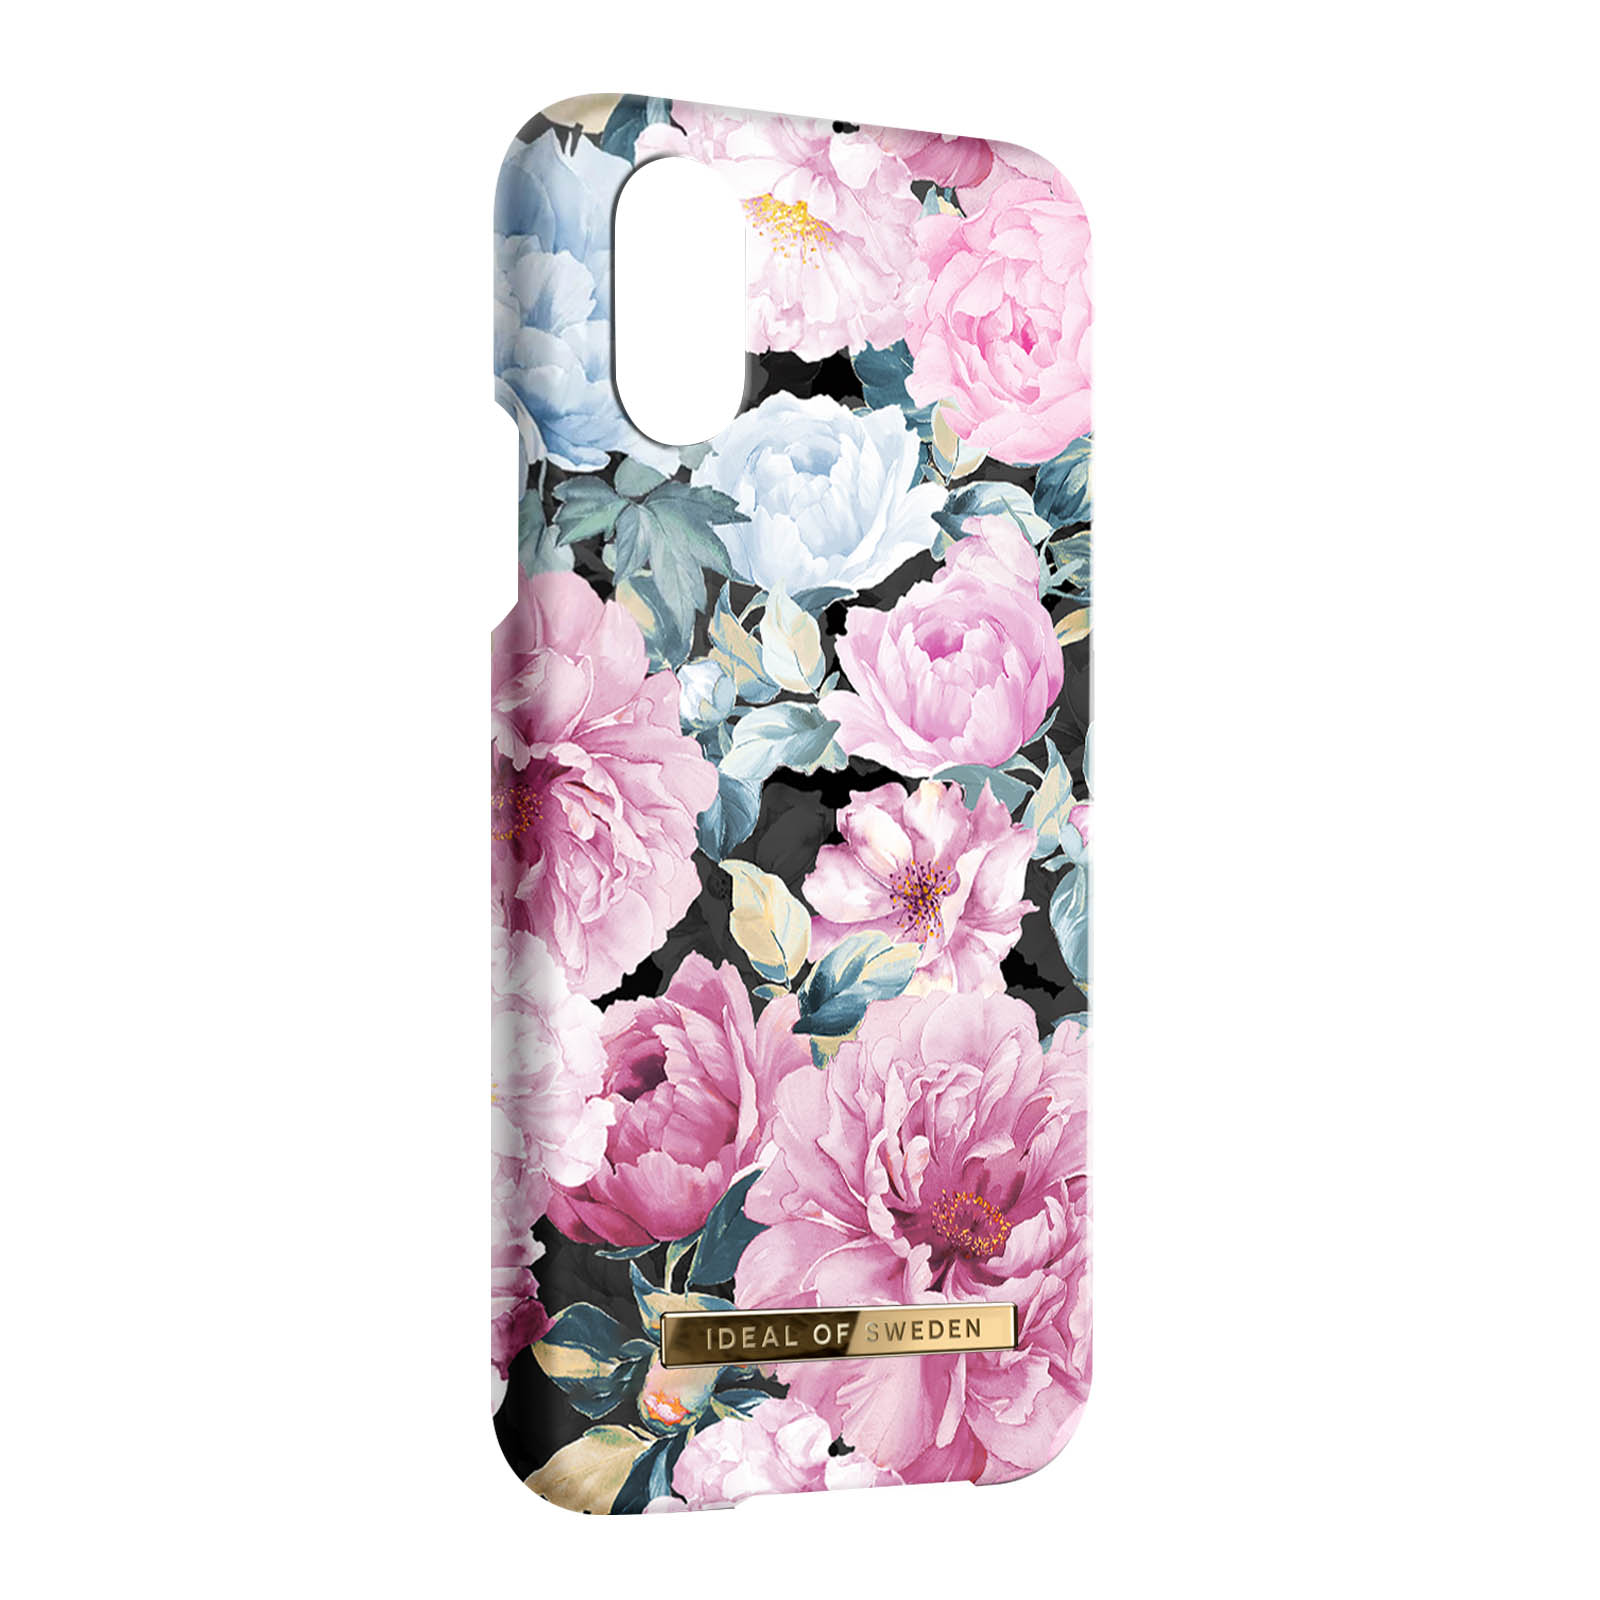 XS, Peony Garden iPhone Hülle Backcover, SWEDEN Apple, IDEAL OF Series, Rosa